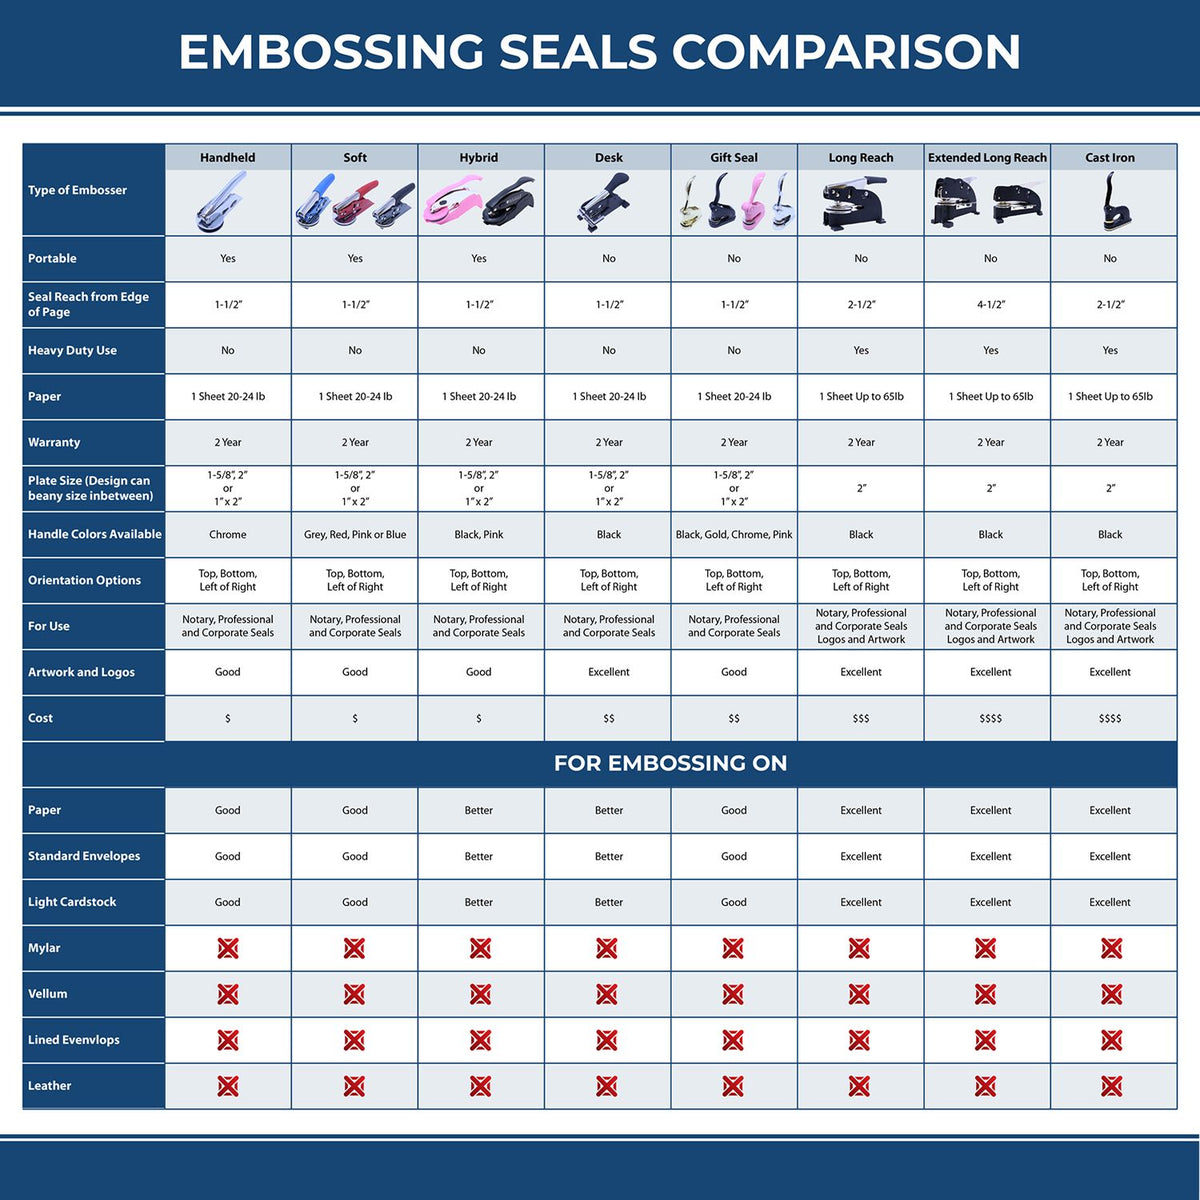 A comparison chart for the different types of mount models available for the Handheld North Dakota Professional Engineer Embosser.